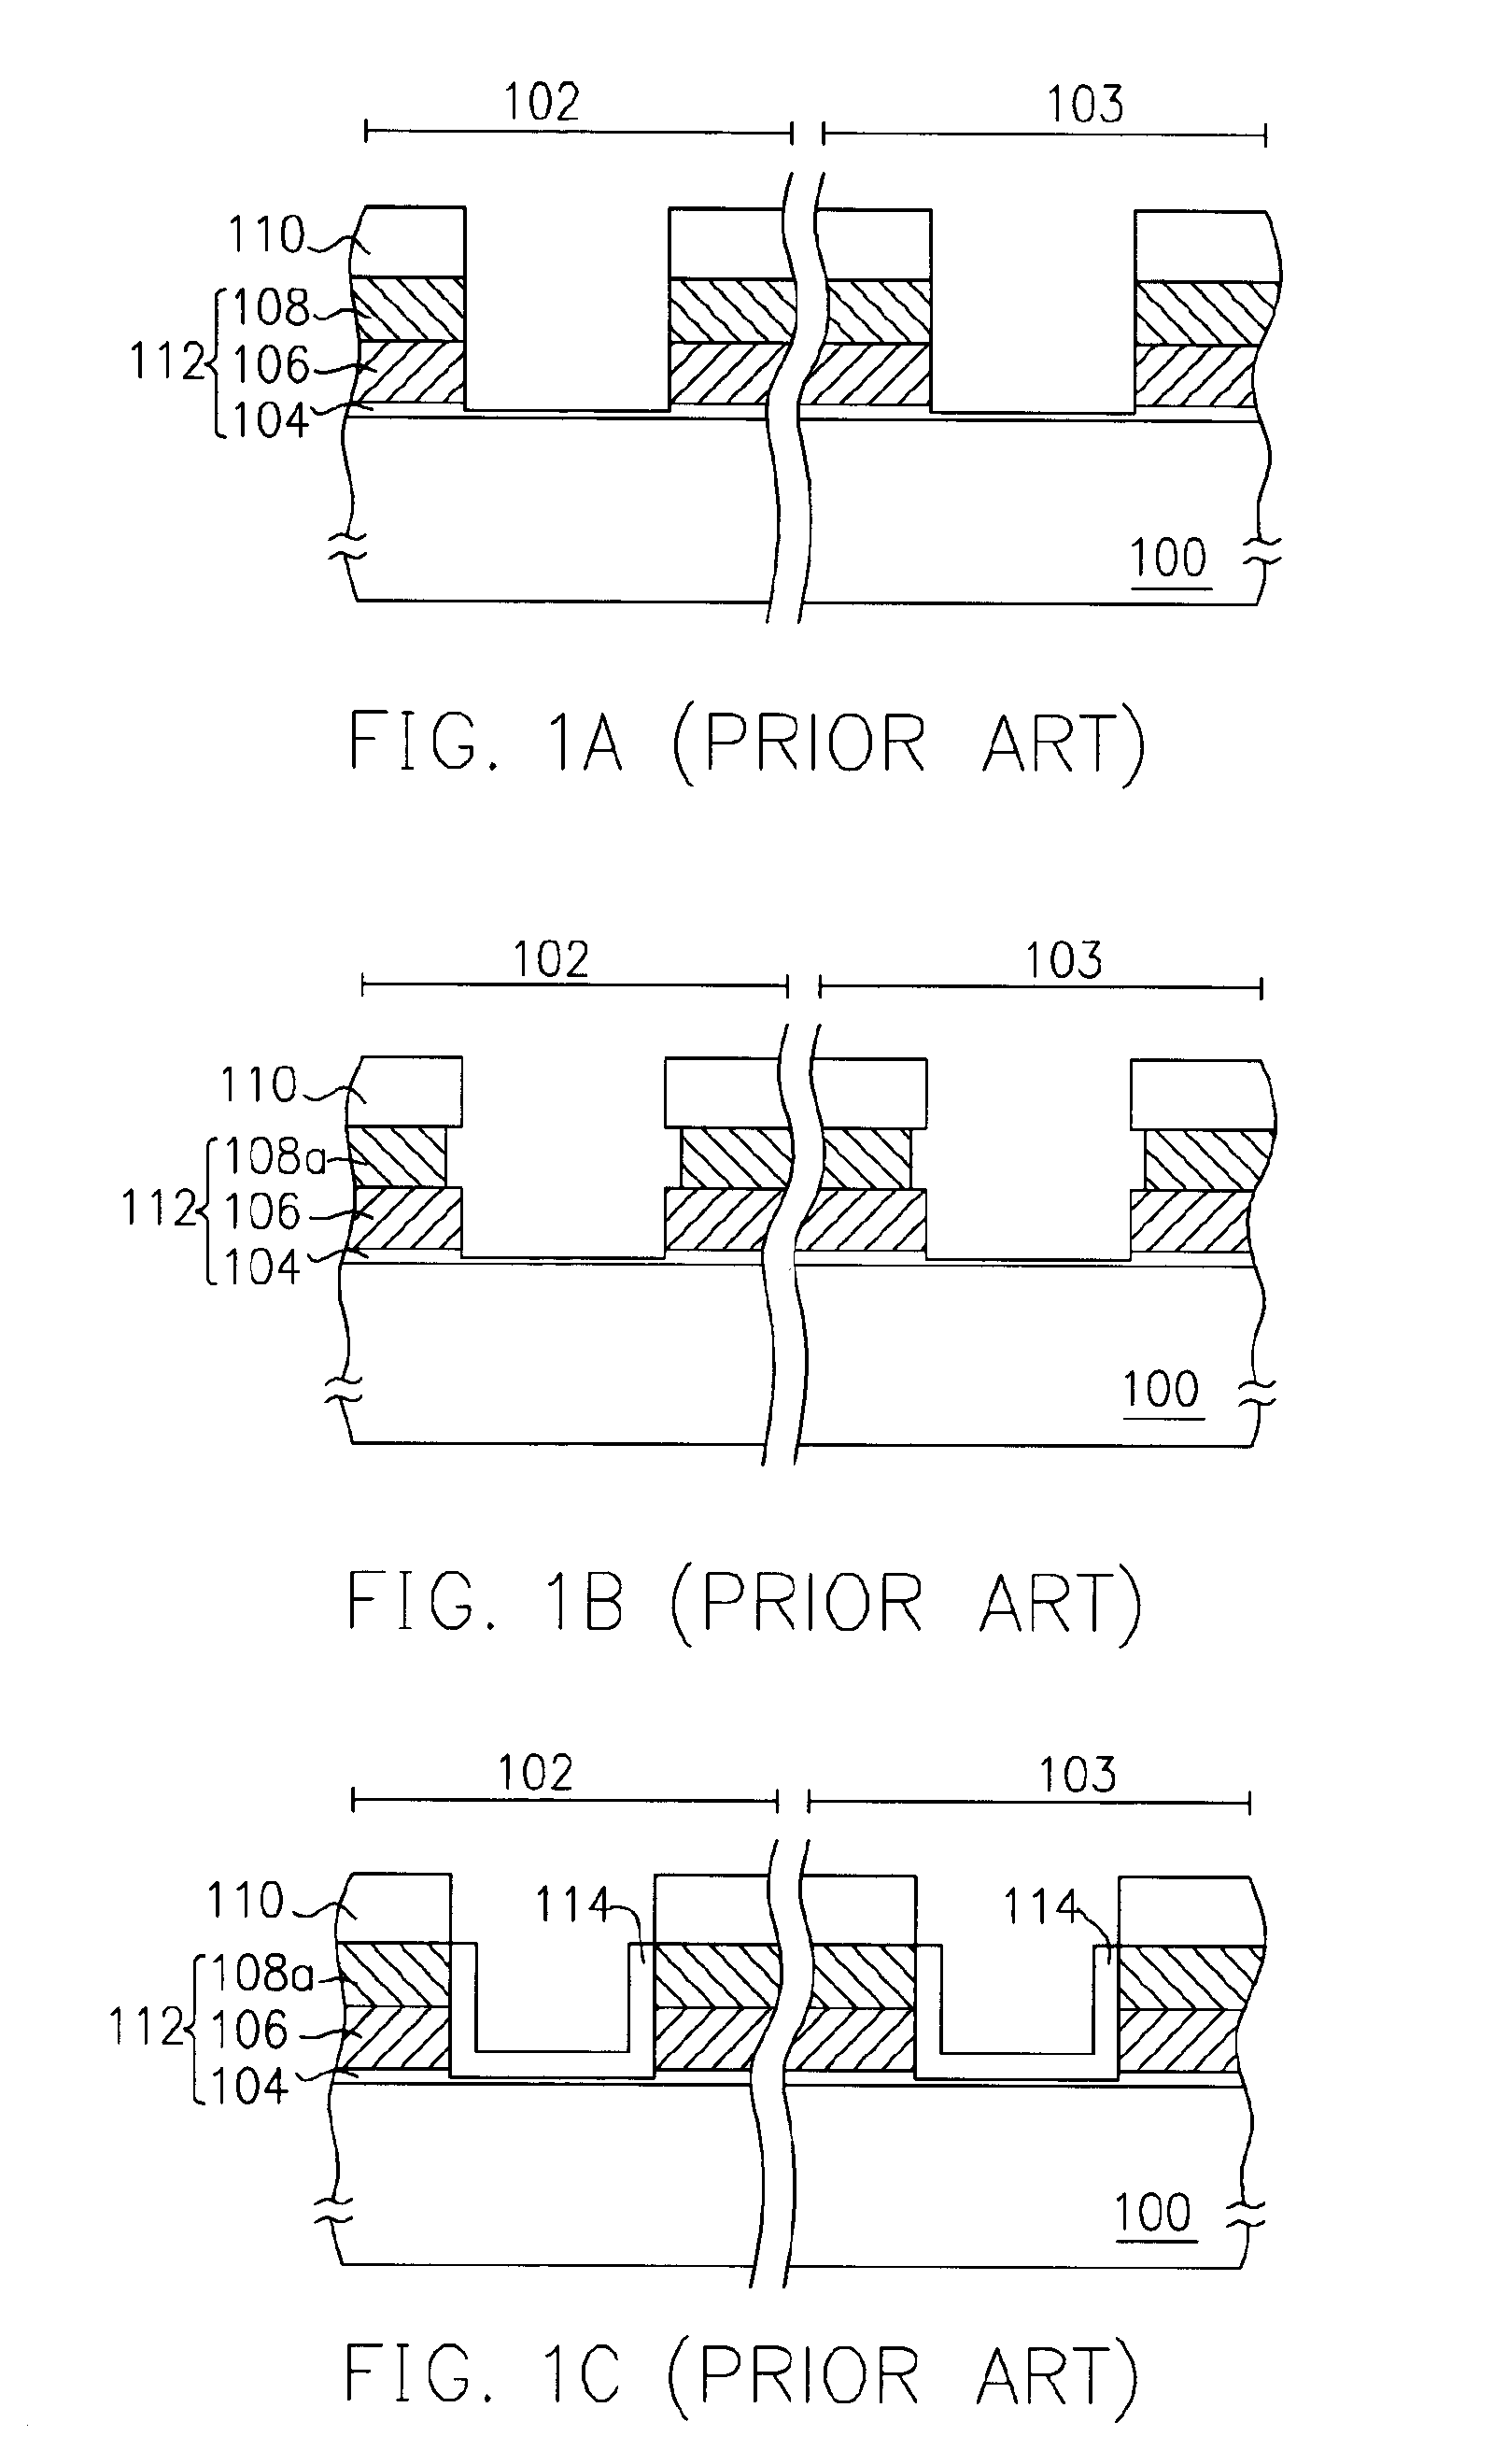 Method of forming semiconductor device with non-conformal liner layer that is thinner on sidewall surfaces